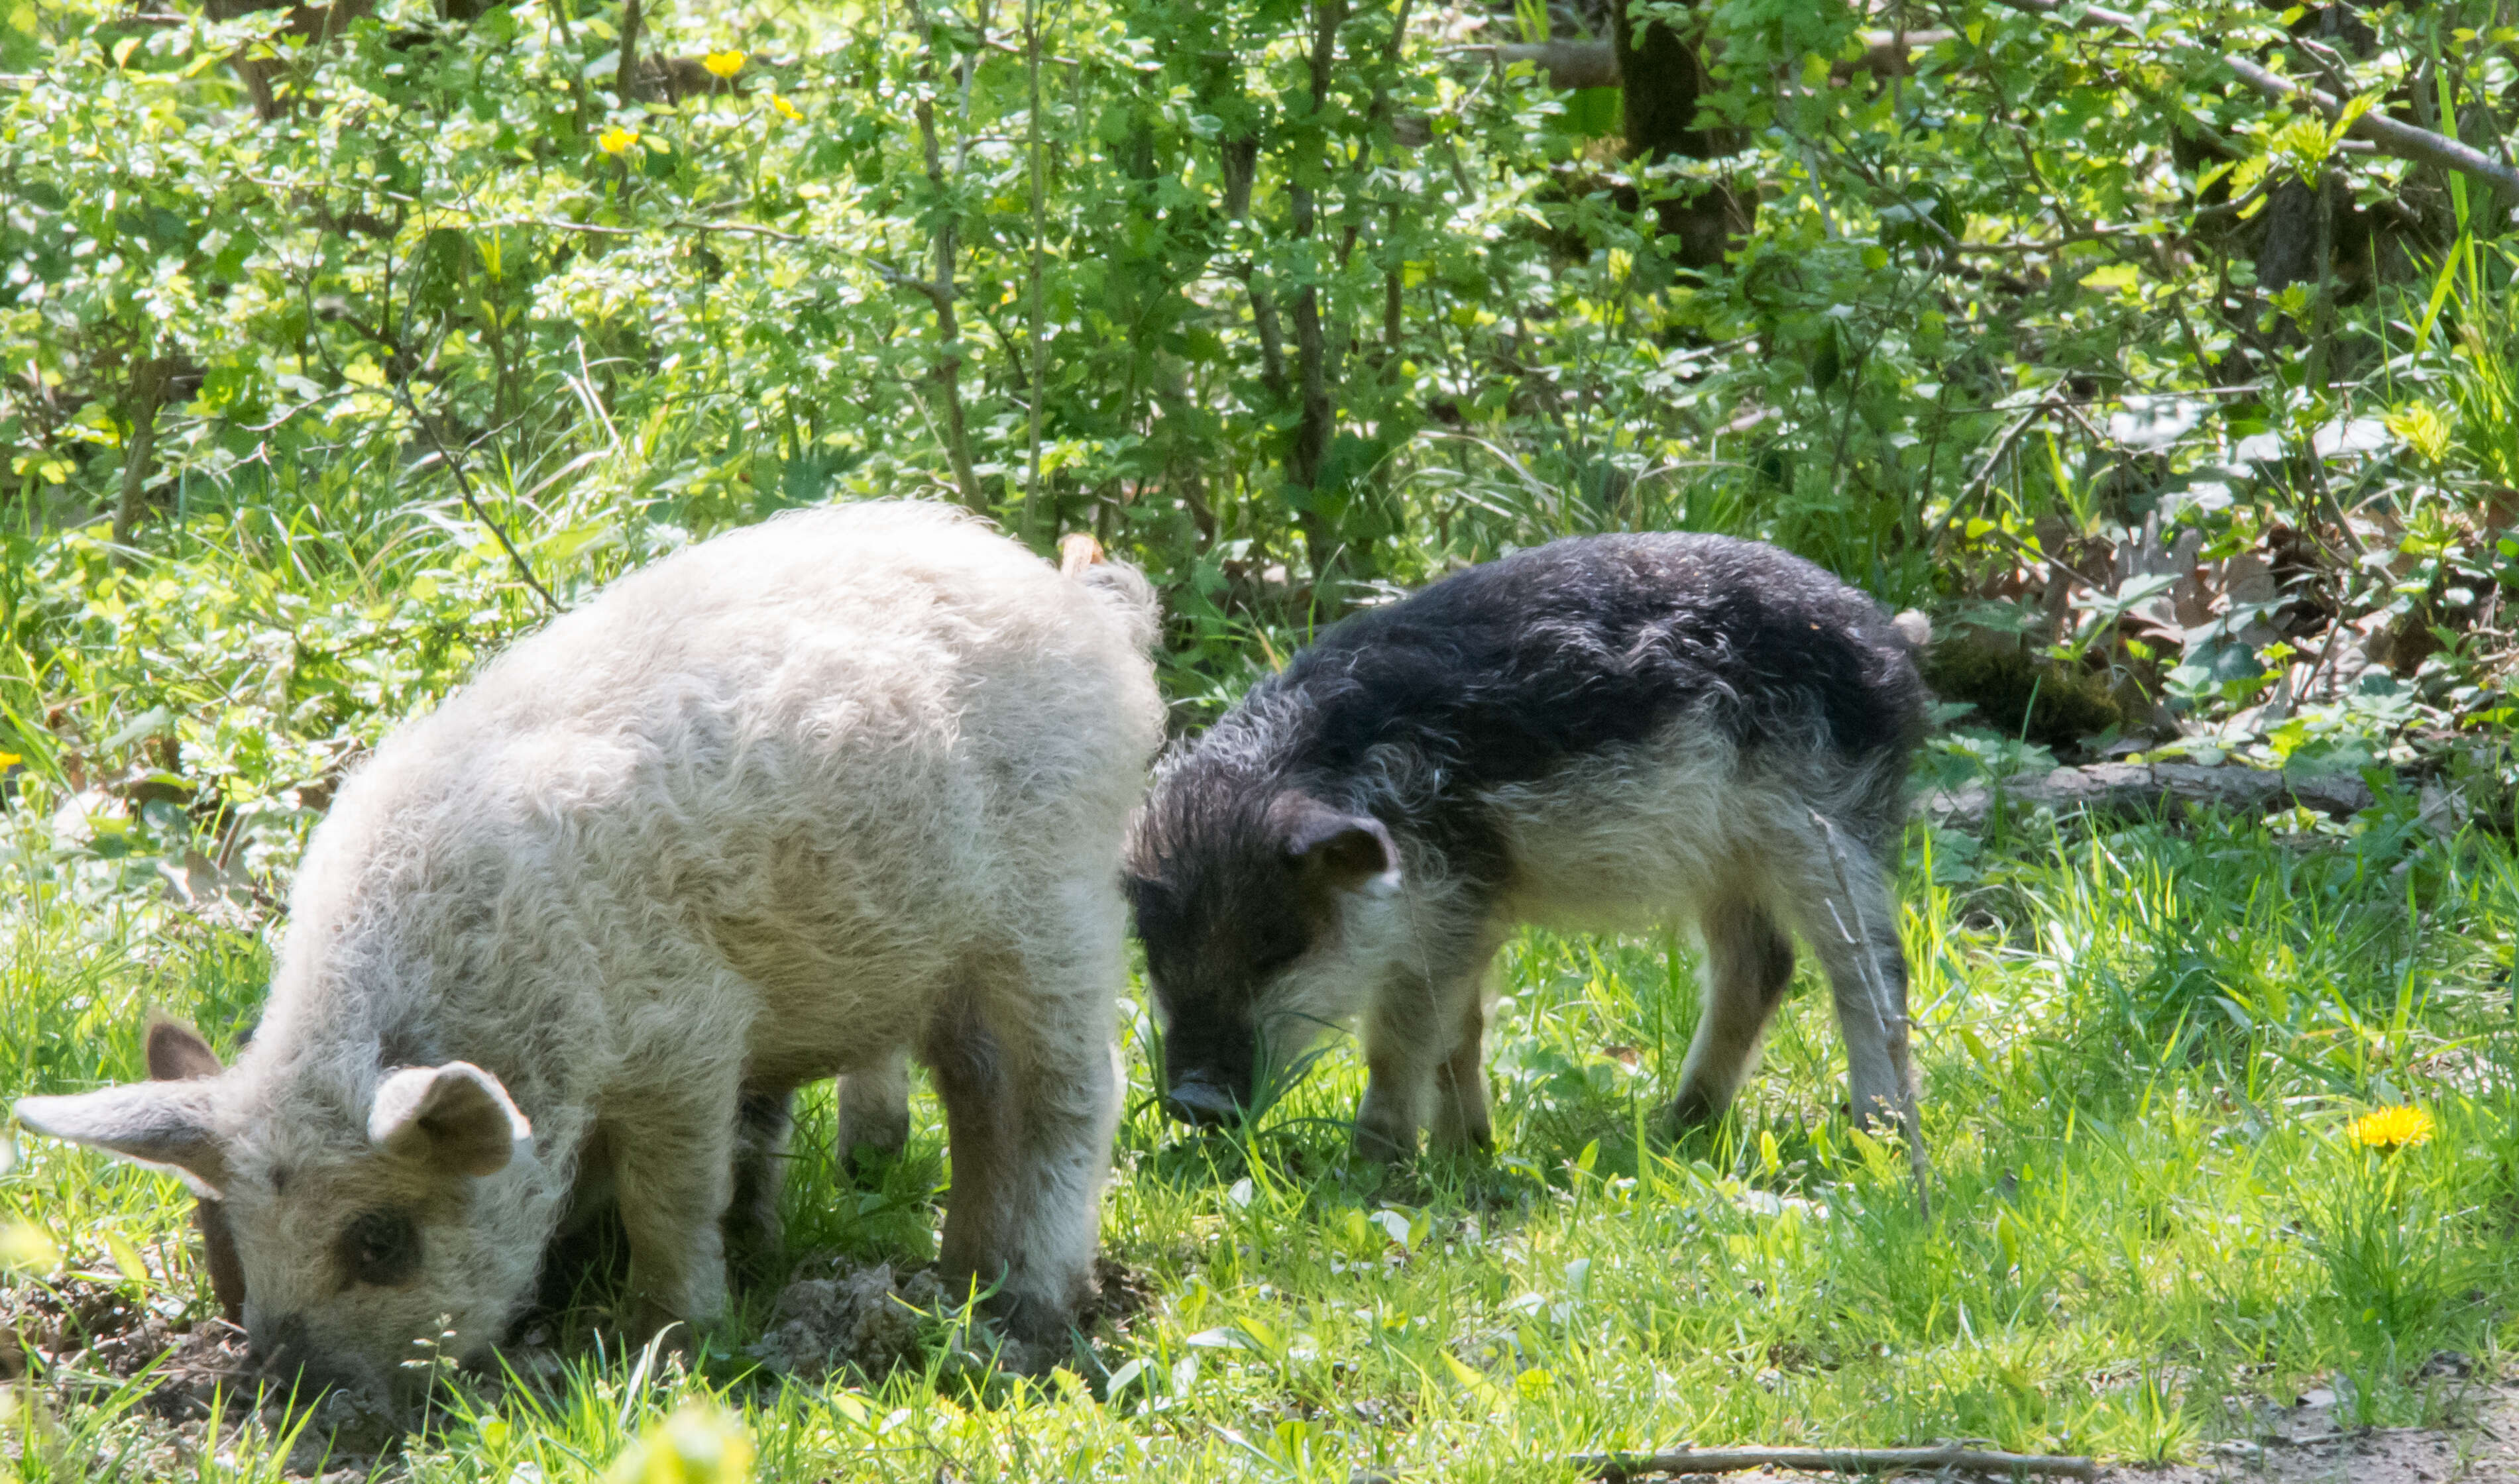 Hairy Hungarian sheep pig graze in the grass